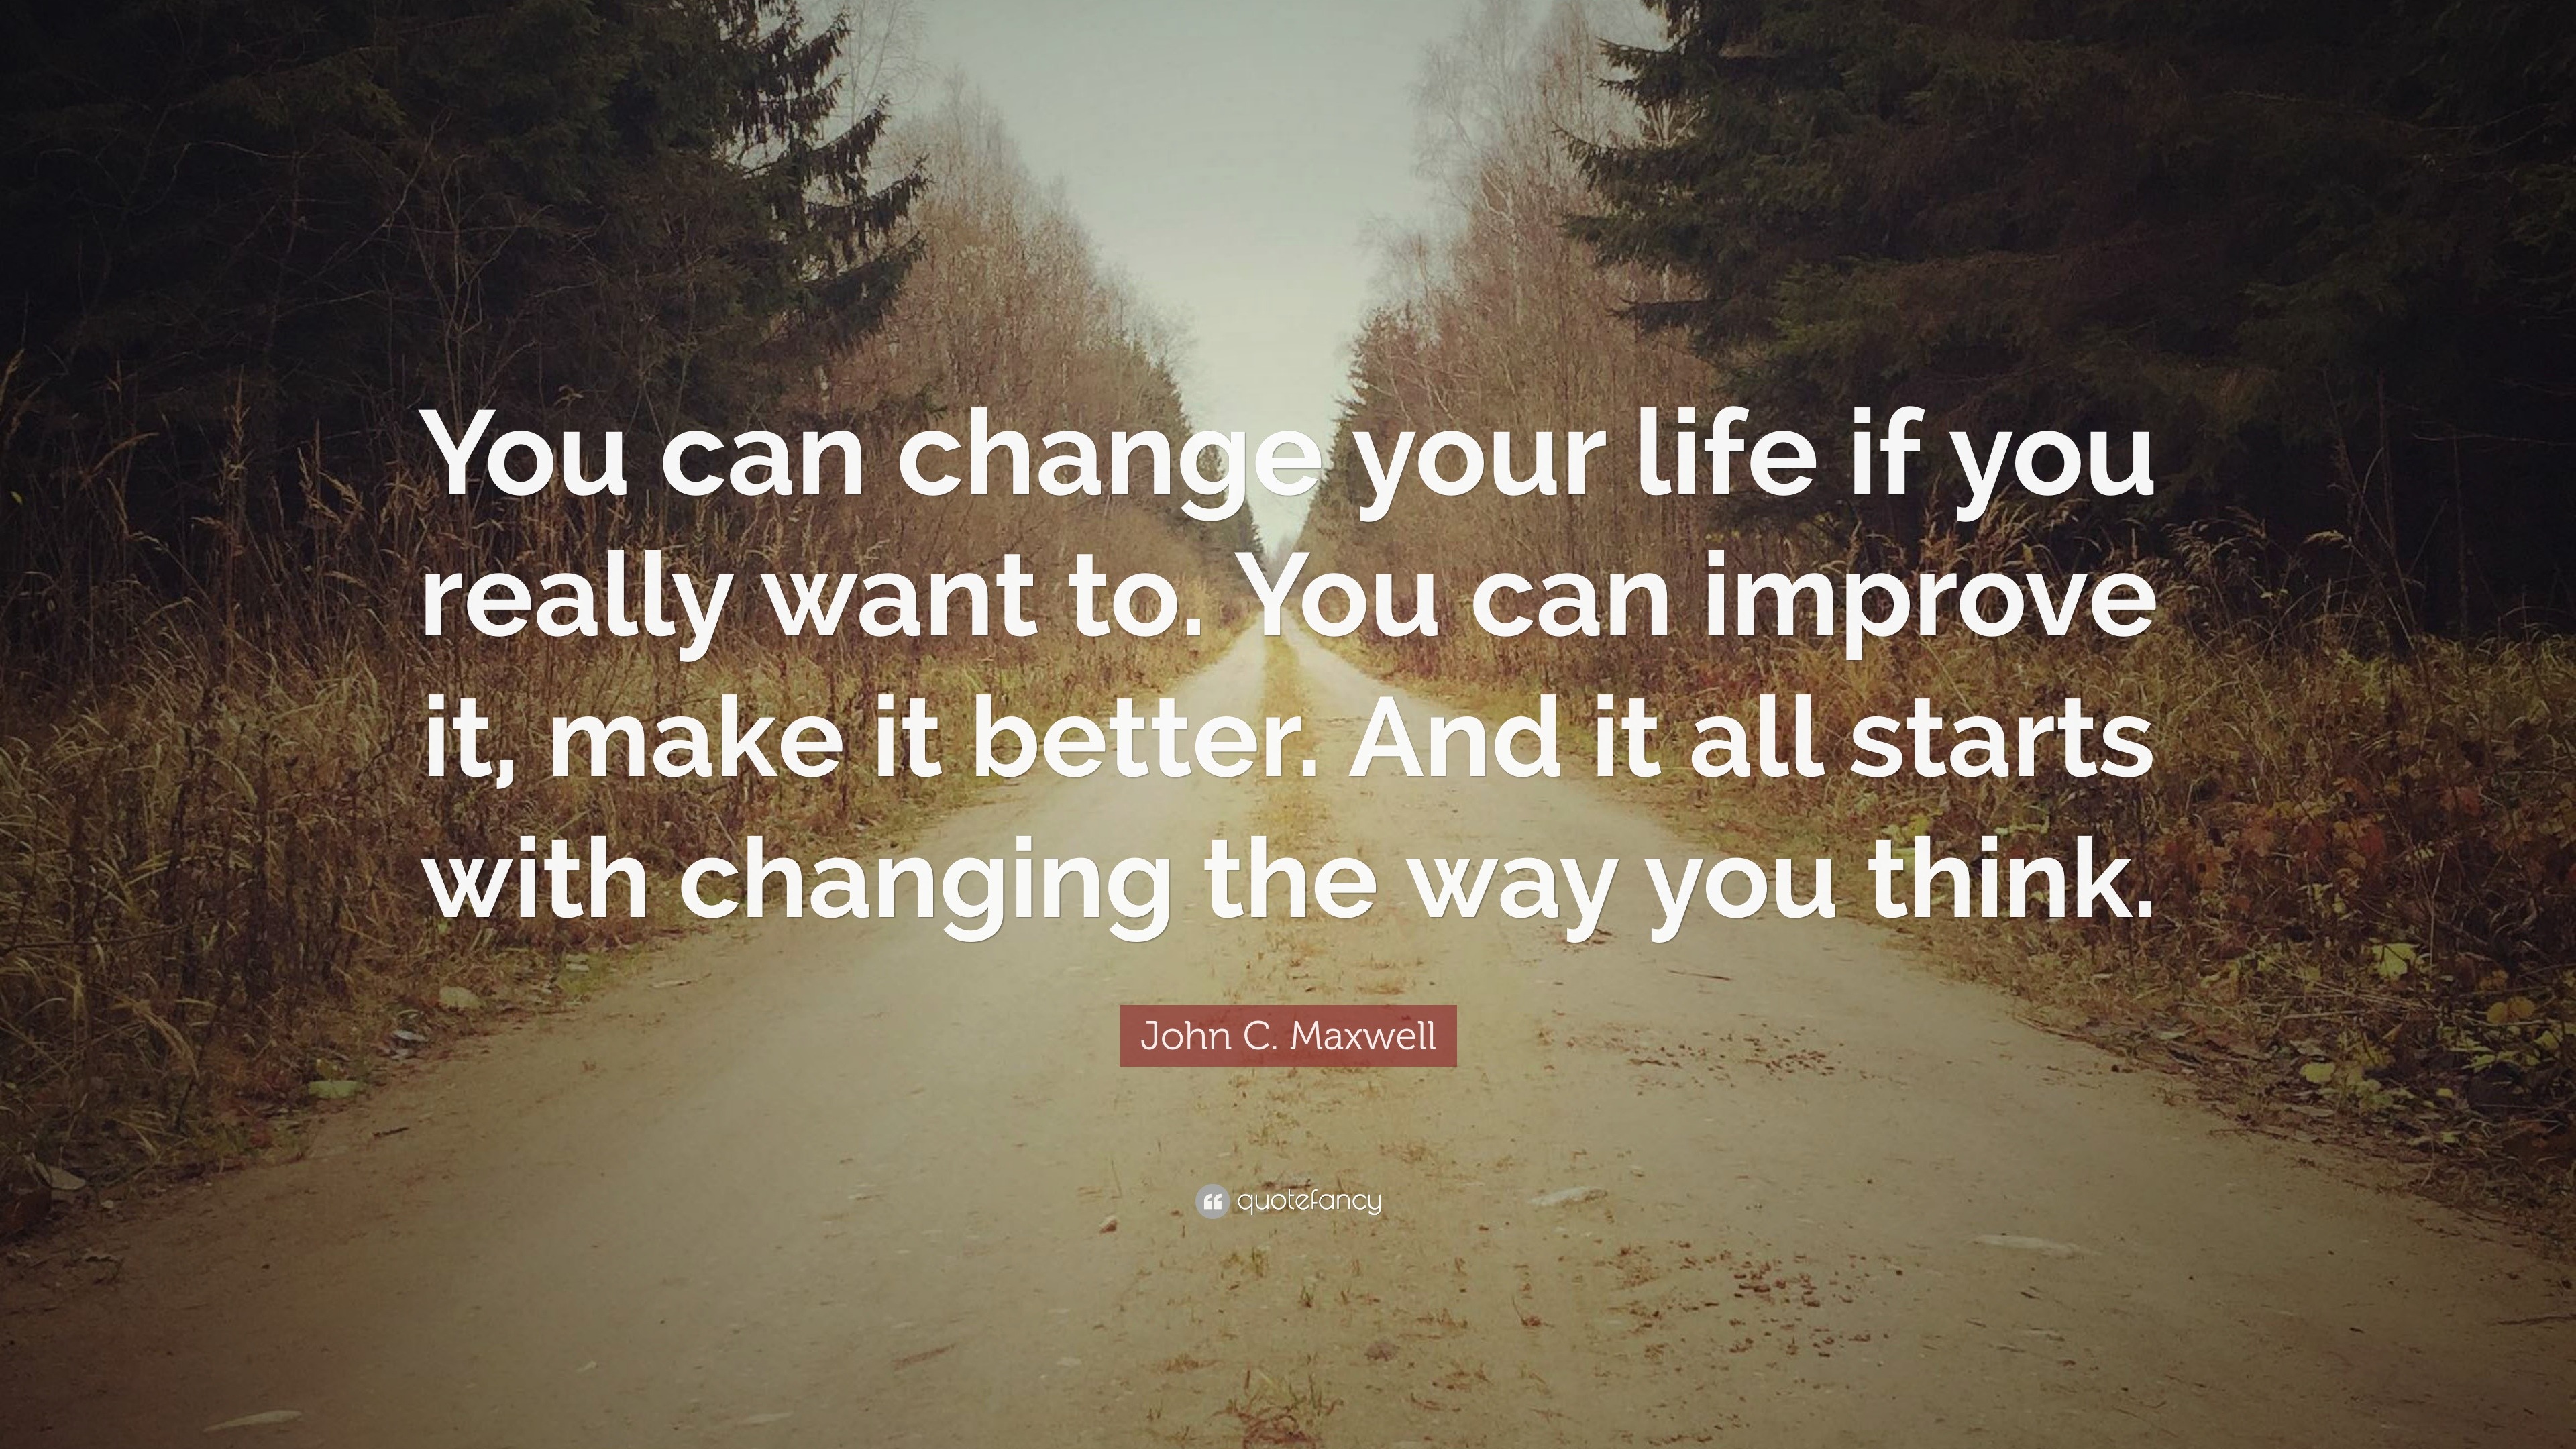 John C. Maxwell Quote: “You can change your life if you really want to